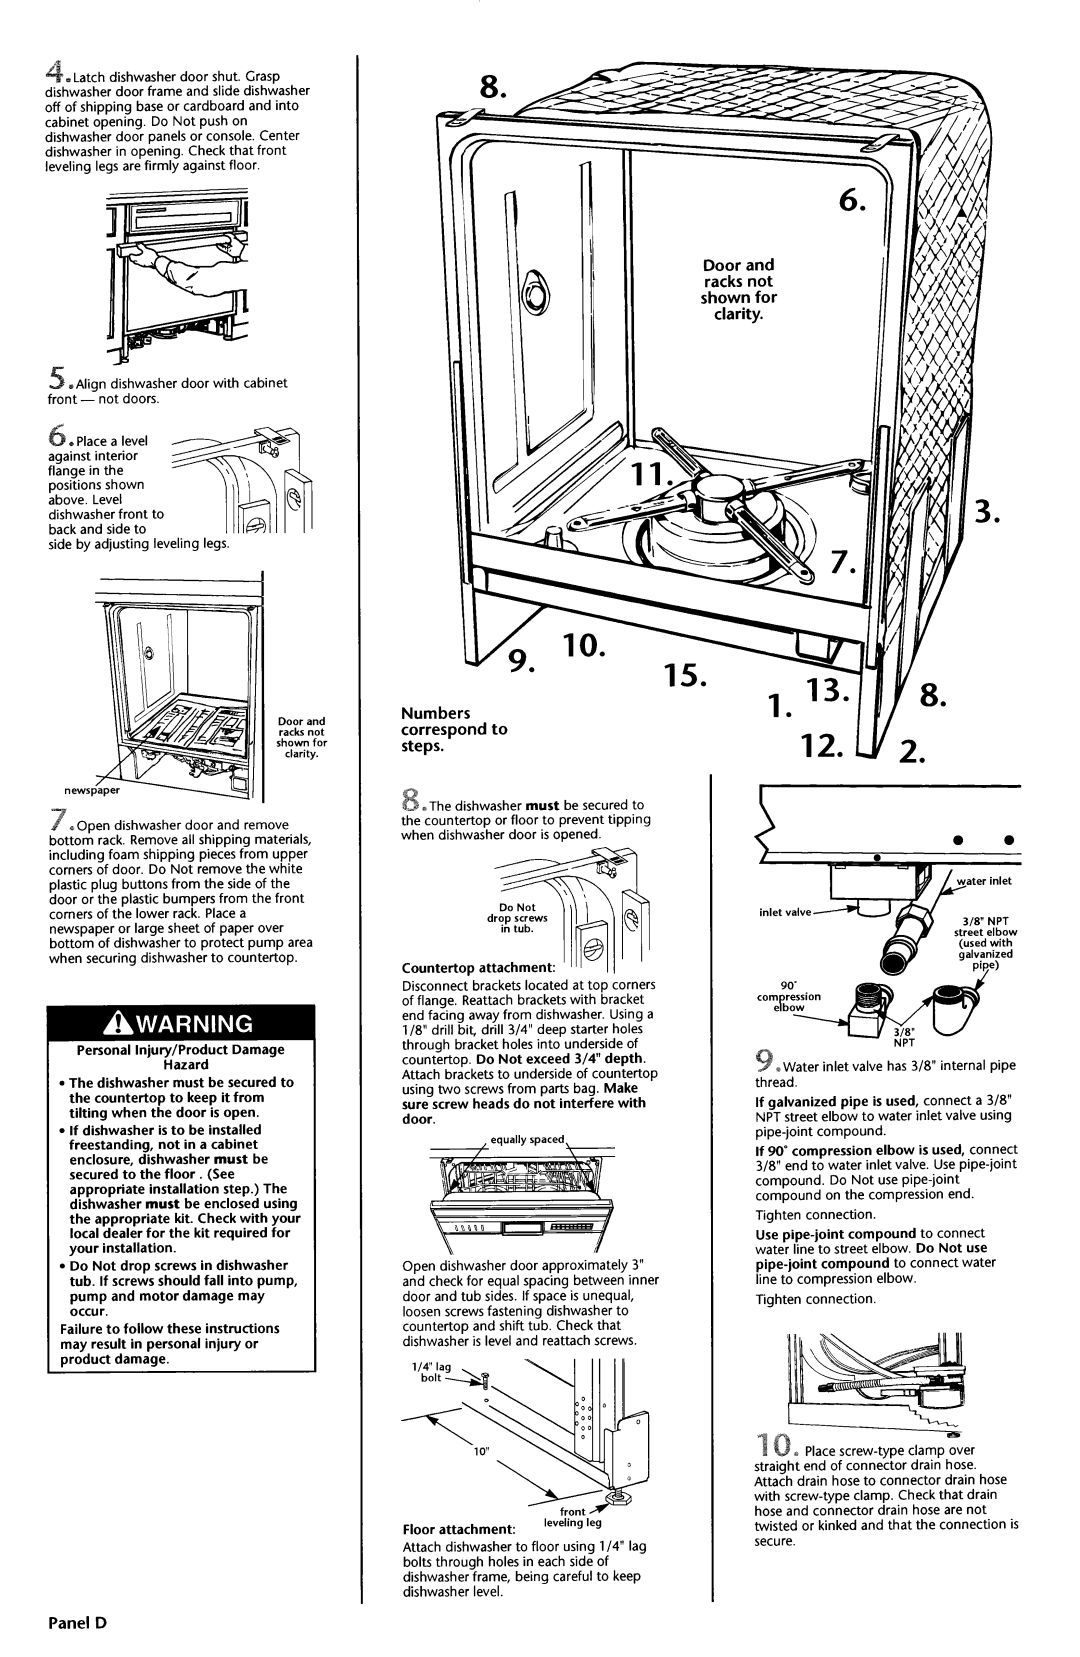 KitchenAid 97415 14 Door and racks not shown for clarity Numbers correspond to steps, Panel D, equally spaced 